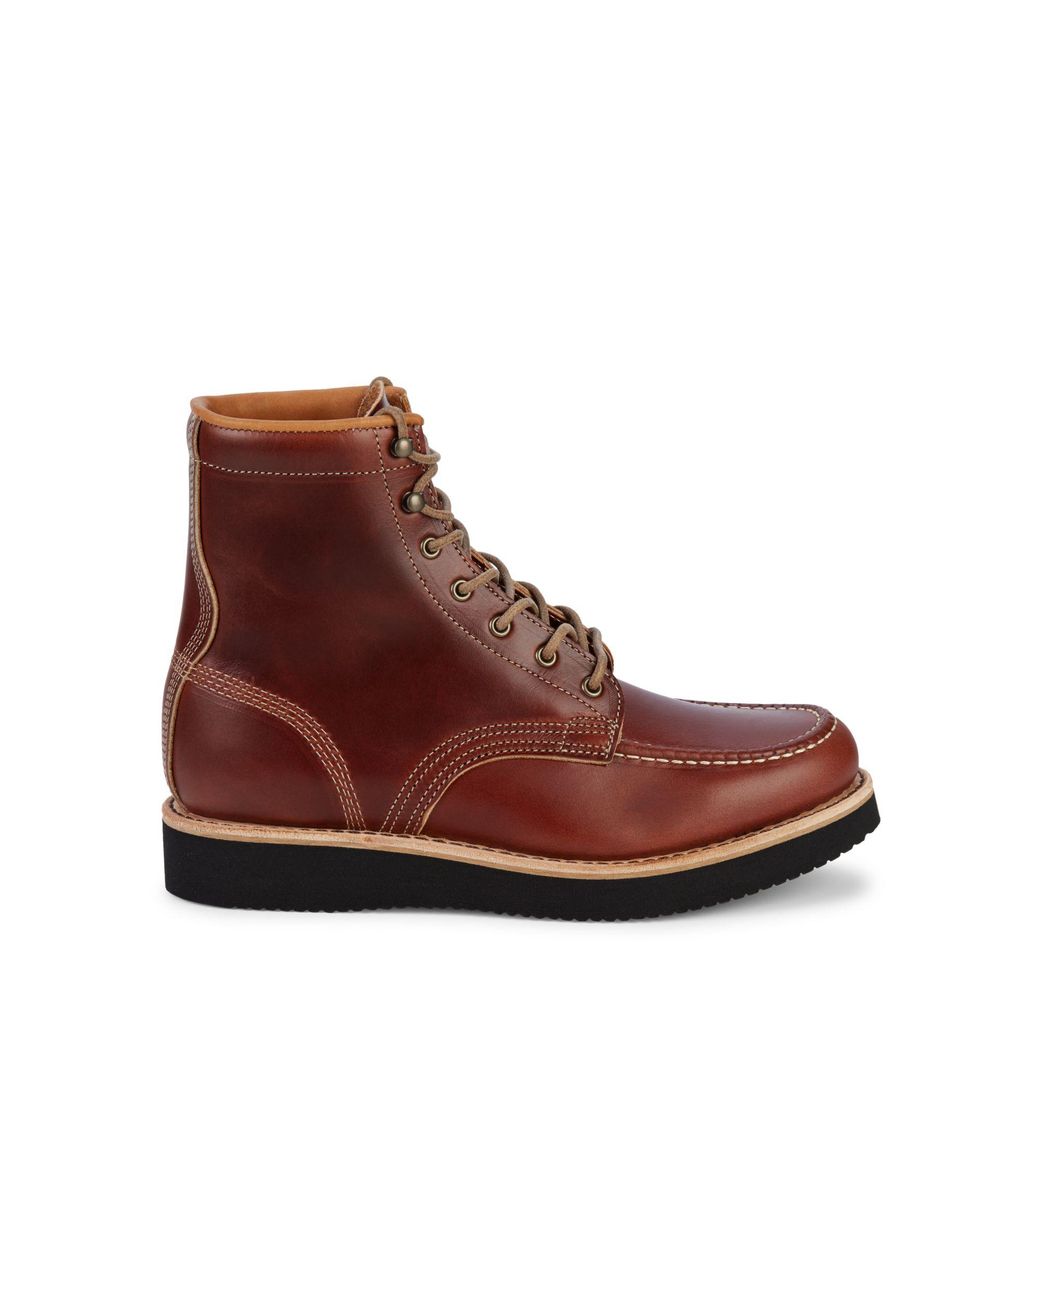 Timberland American Craft Boots in Brown for Men